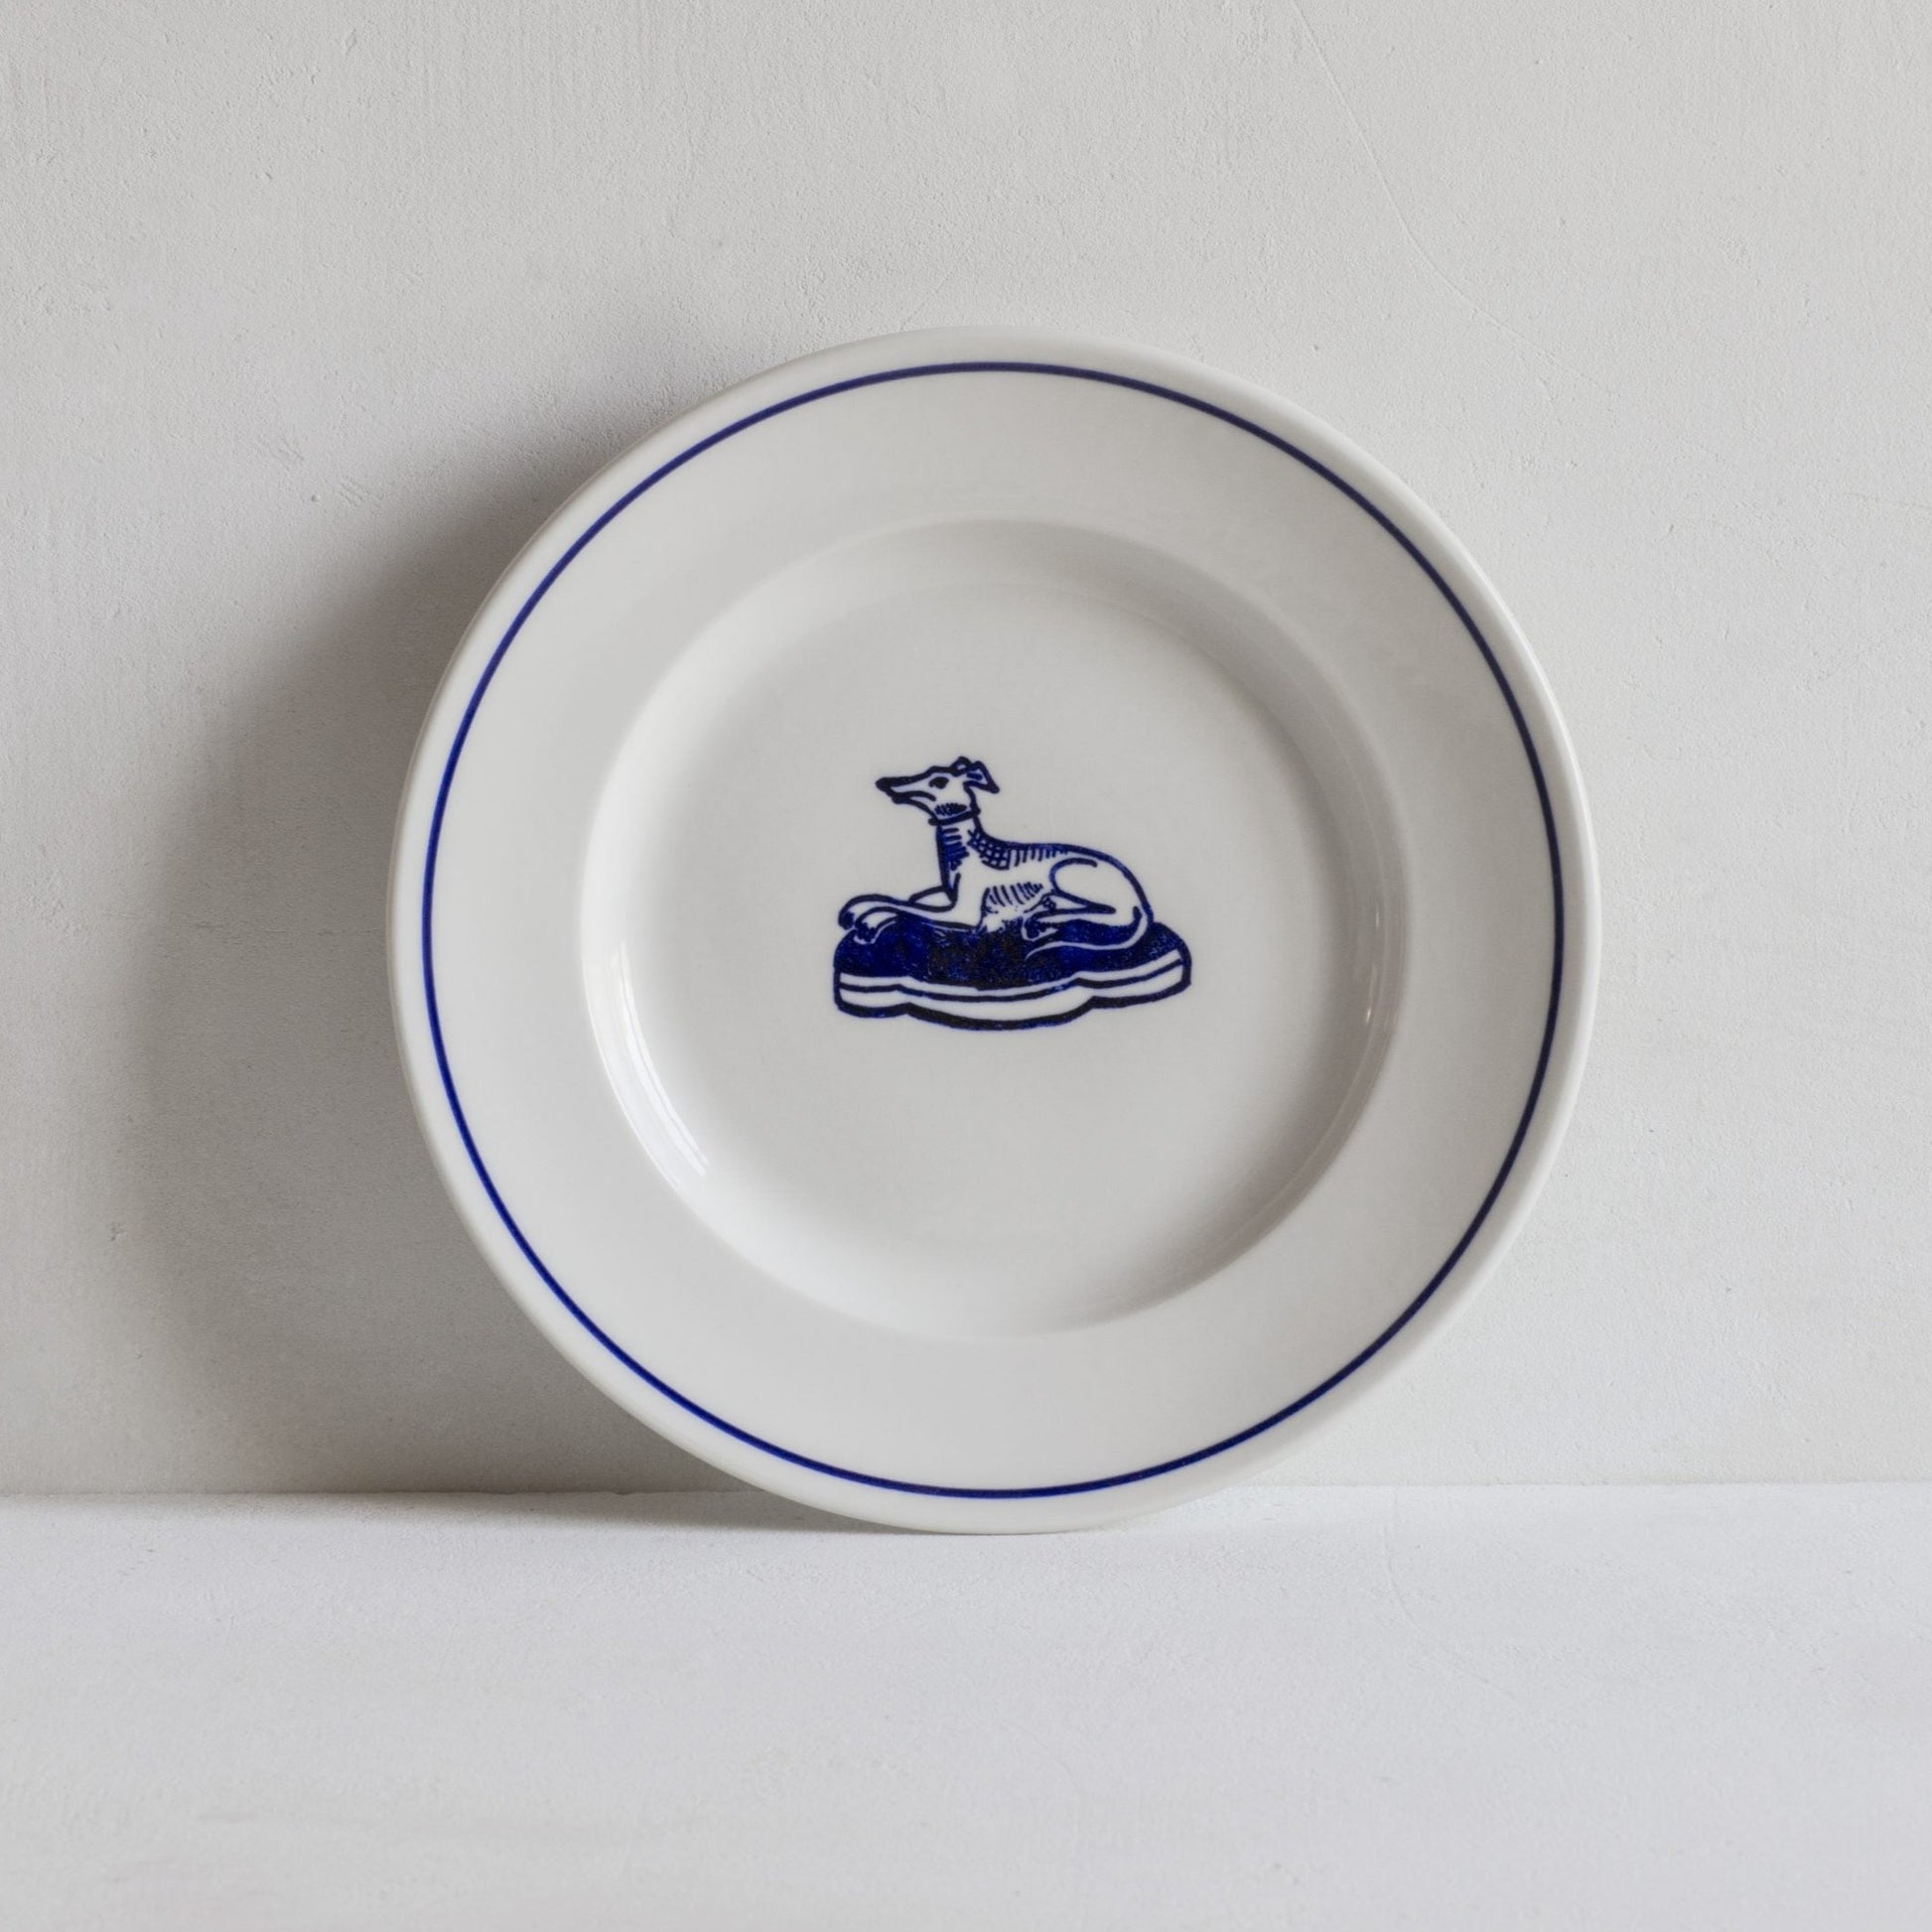 Classical Porcelain Side Plate with Blue Line and Hound